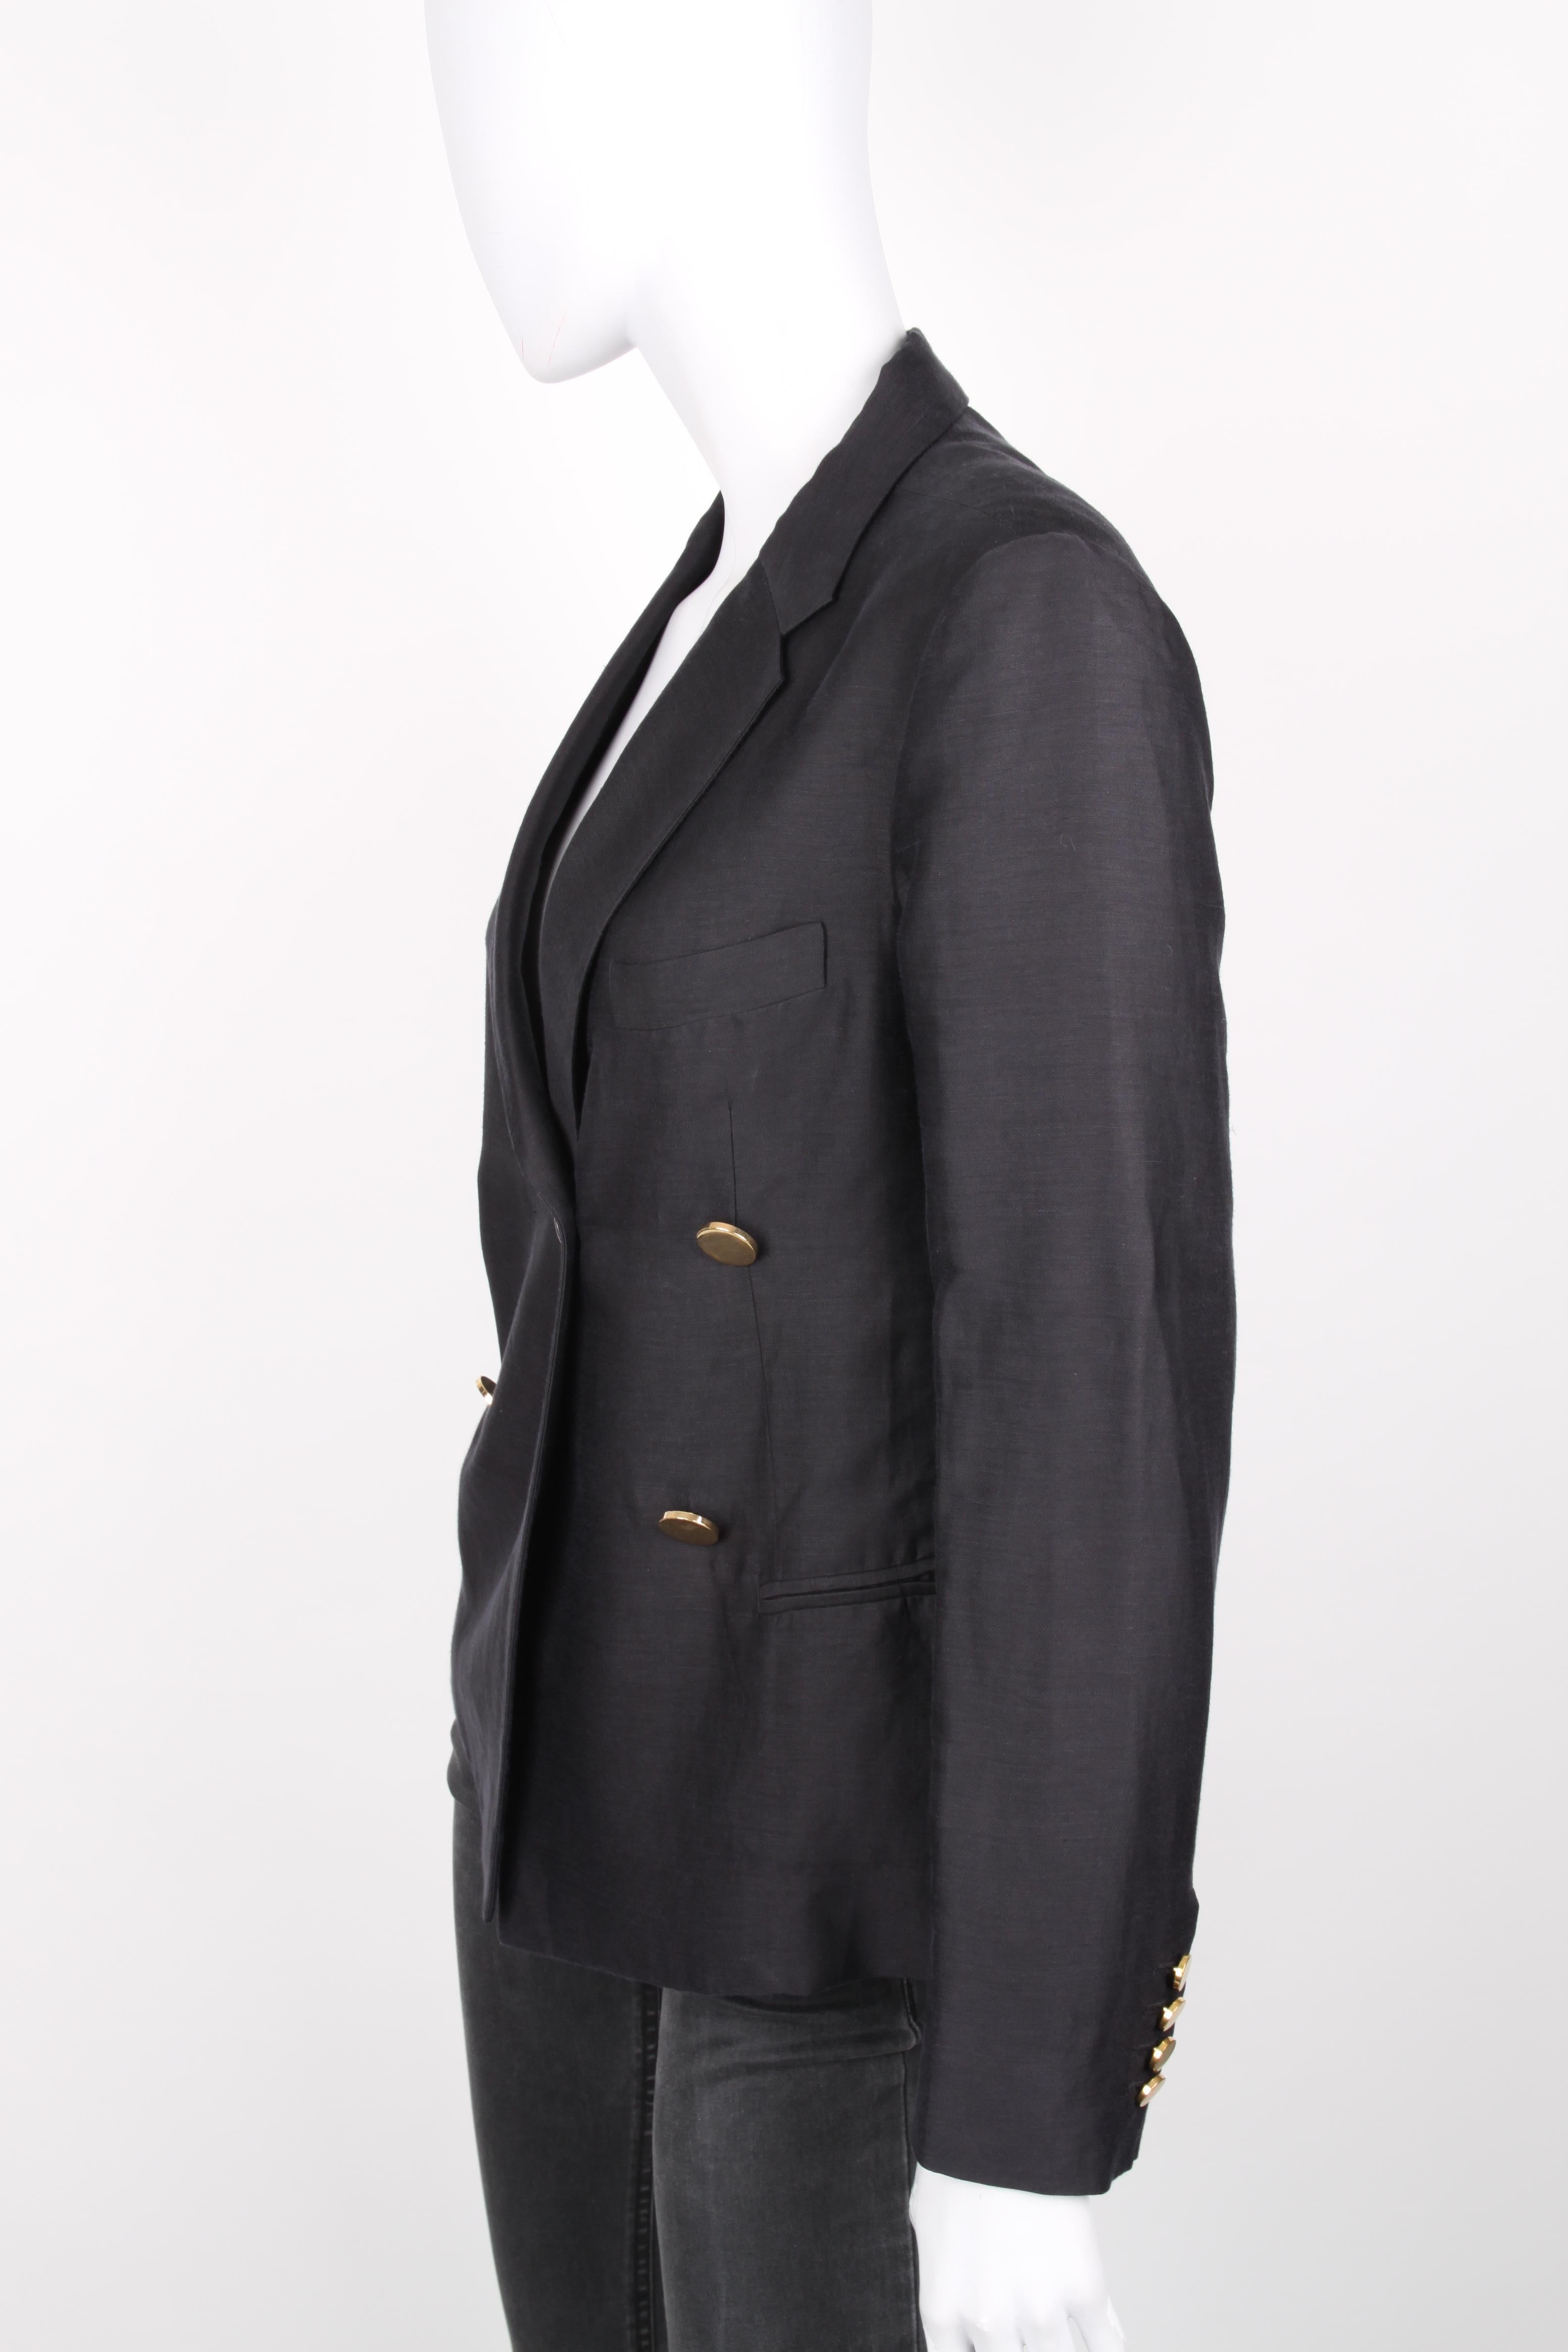 Céline Black Linen Double Breasted Longsleeve Blazer.

Double-breasted linen blazer from Céline by Phoebe Philo: black double-breasted blazer with long sleeves, front button closure, notched lapels, hip length, shoulderpads and front